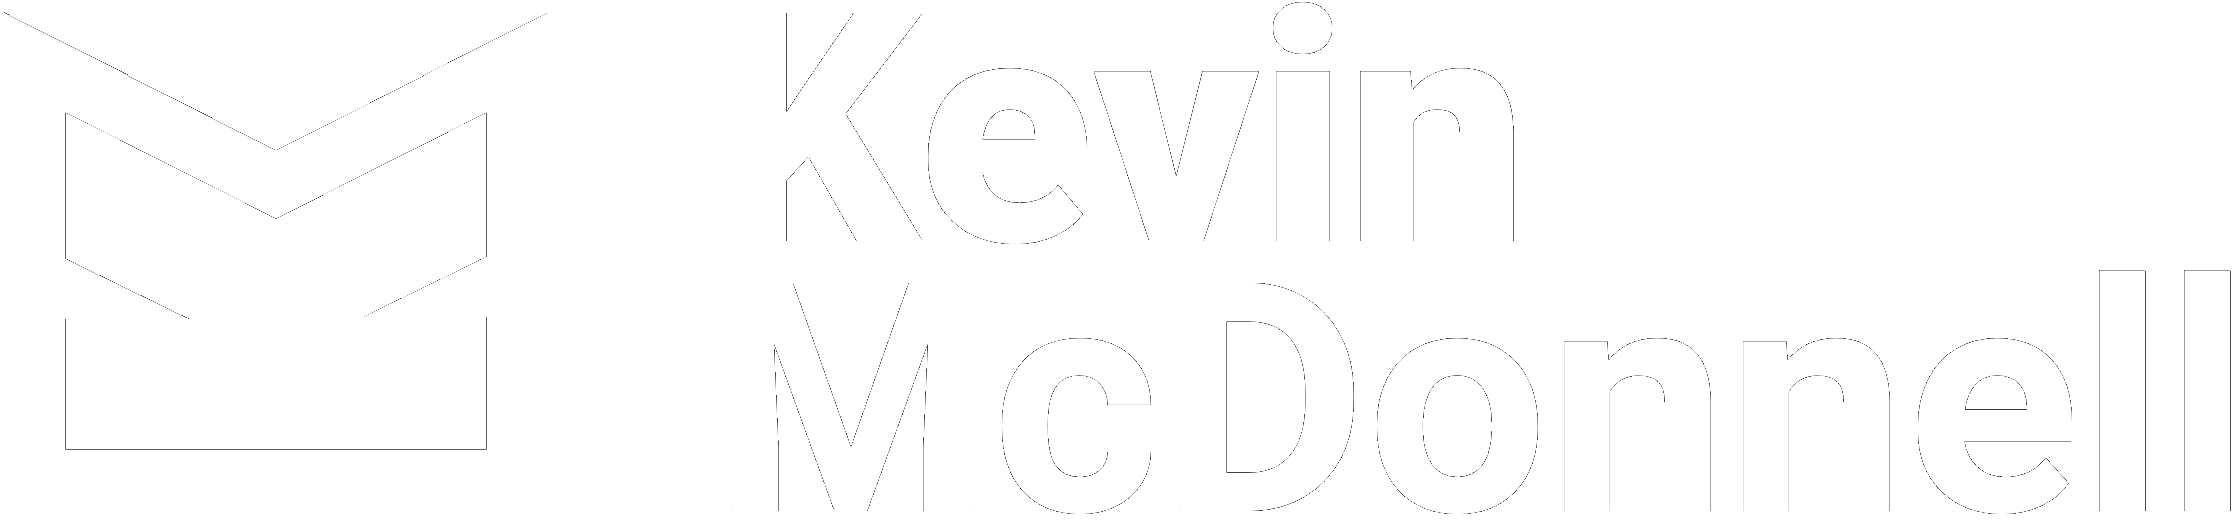 Kevin McDonnell - Business & Executive Advisor, Coach and Consultant